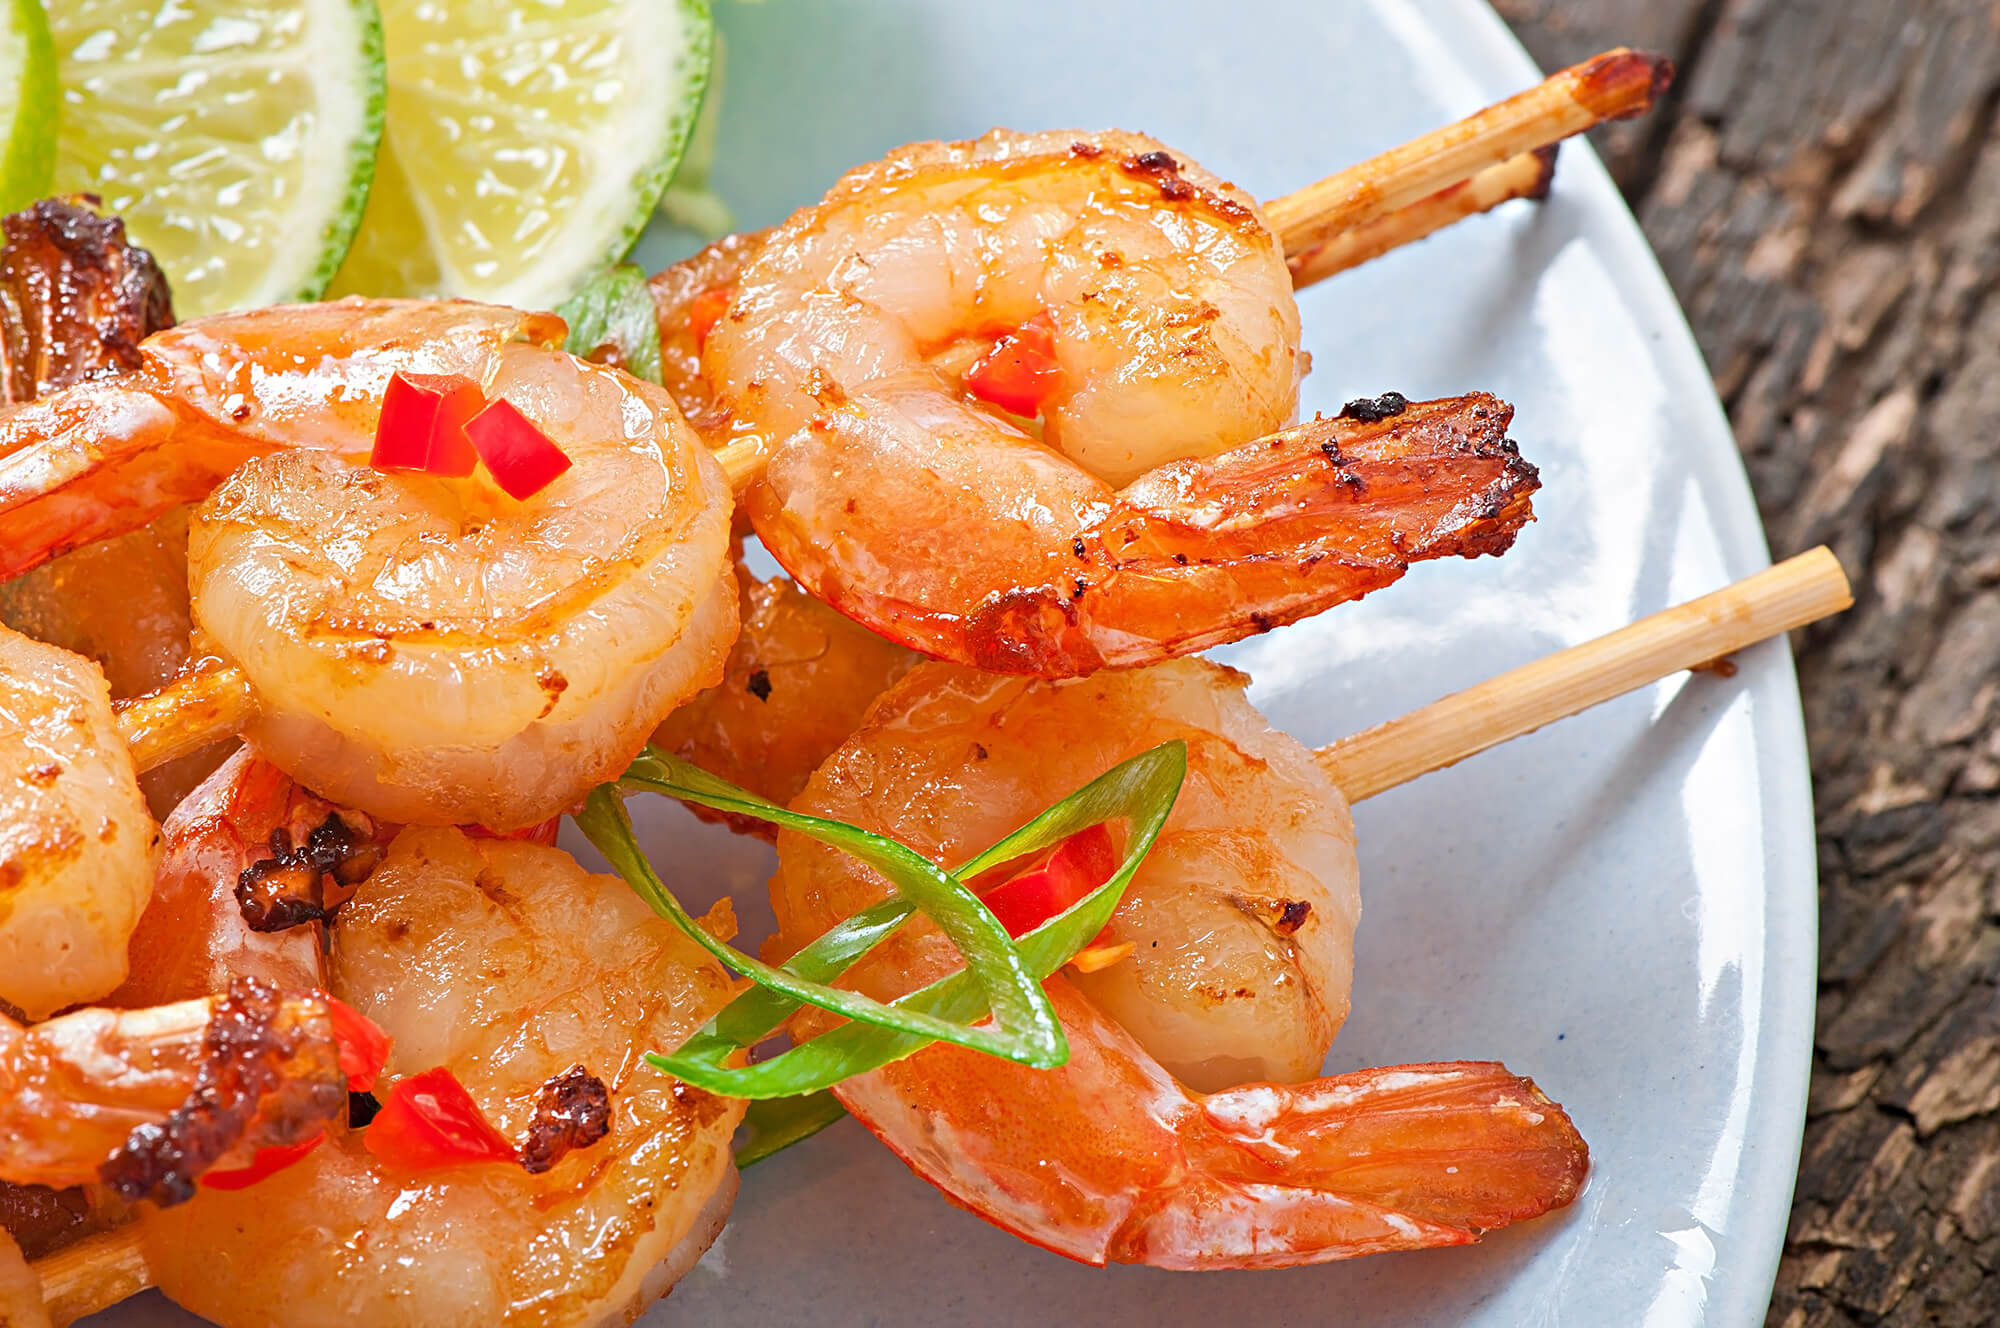 What is Slippery Shrimp? - Chinese Food World